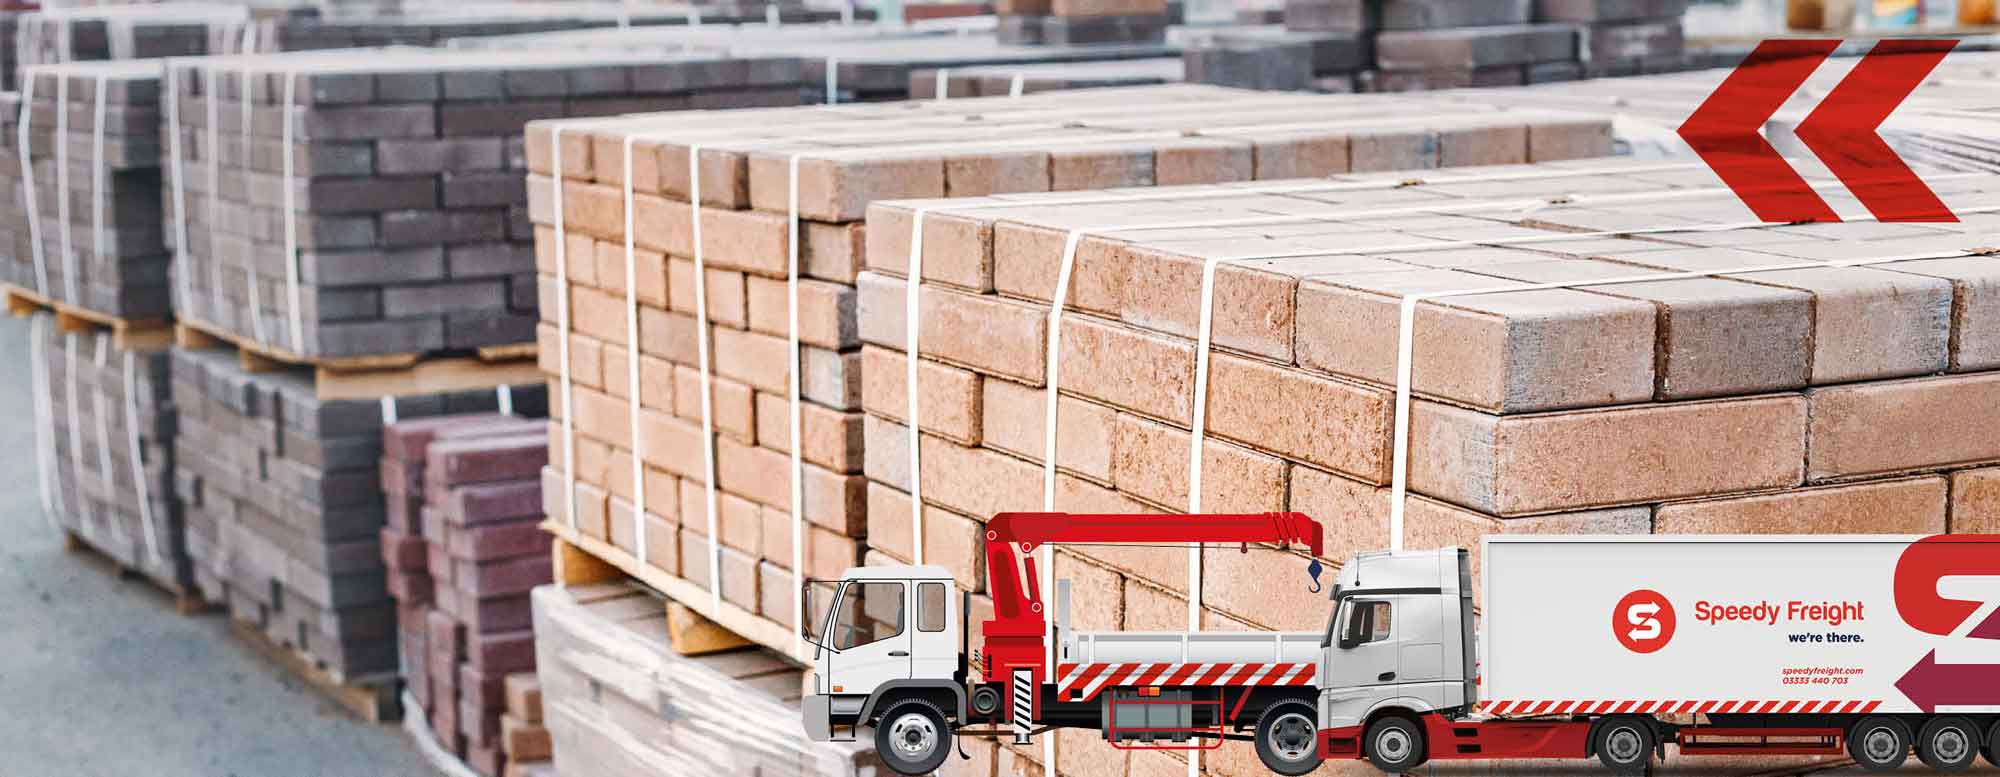 Moving Bricks and Tiles: A Construction Delivery Case Study